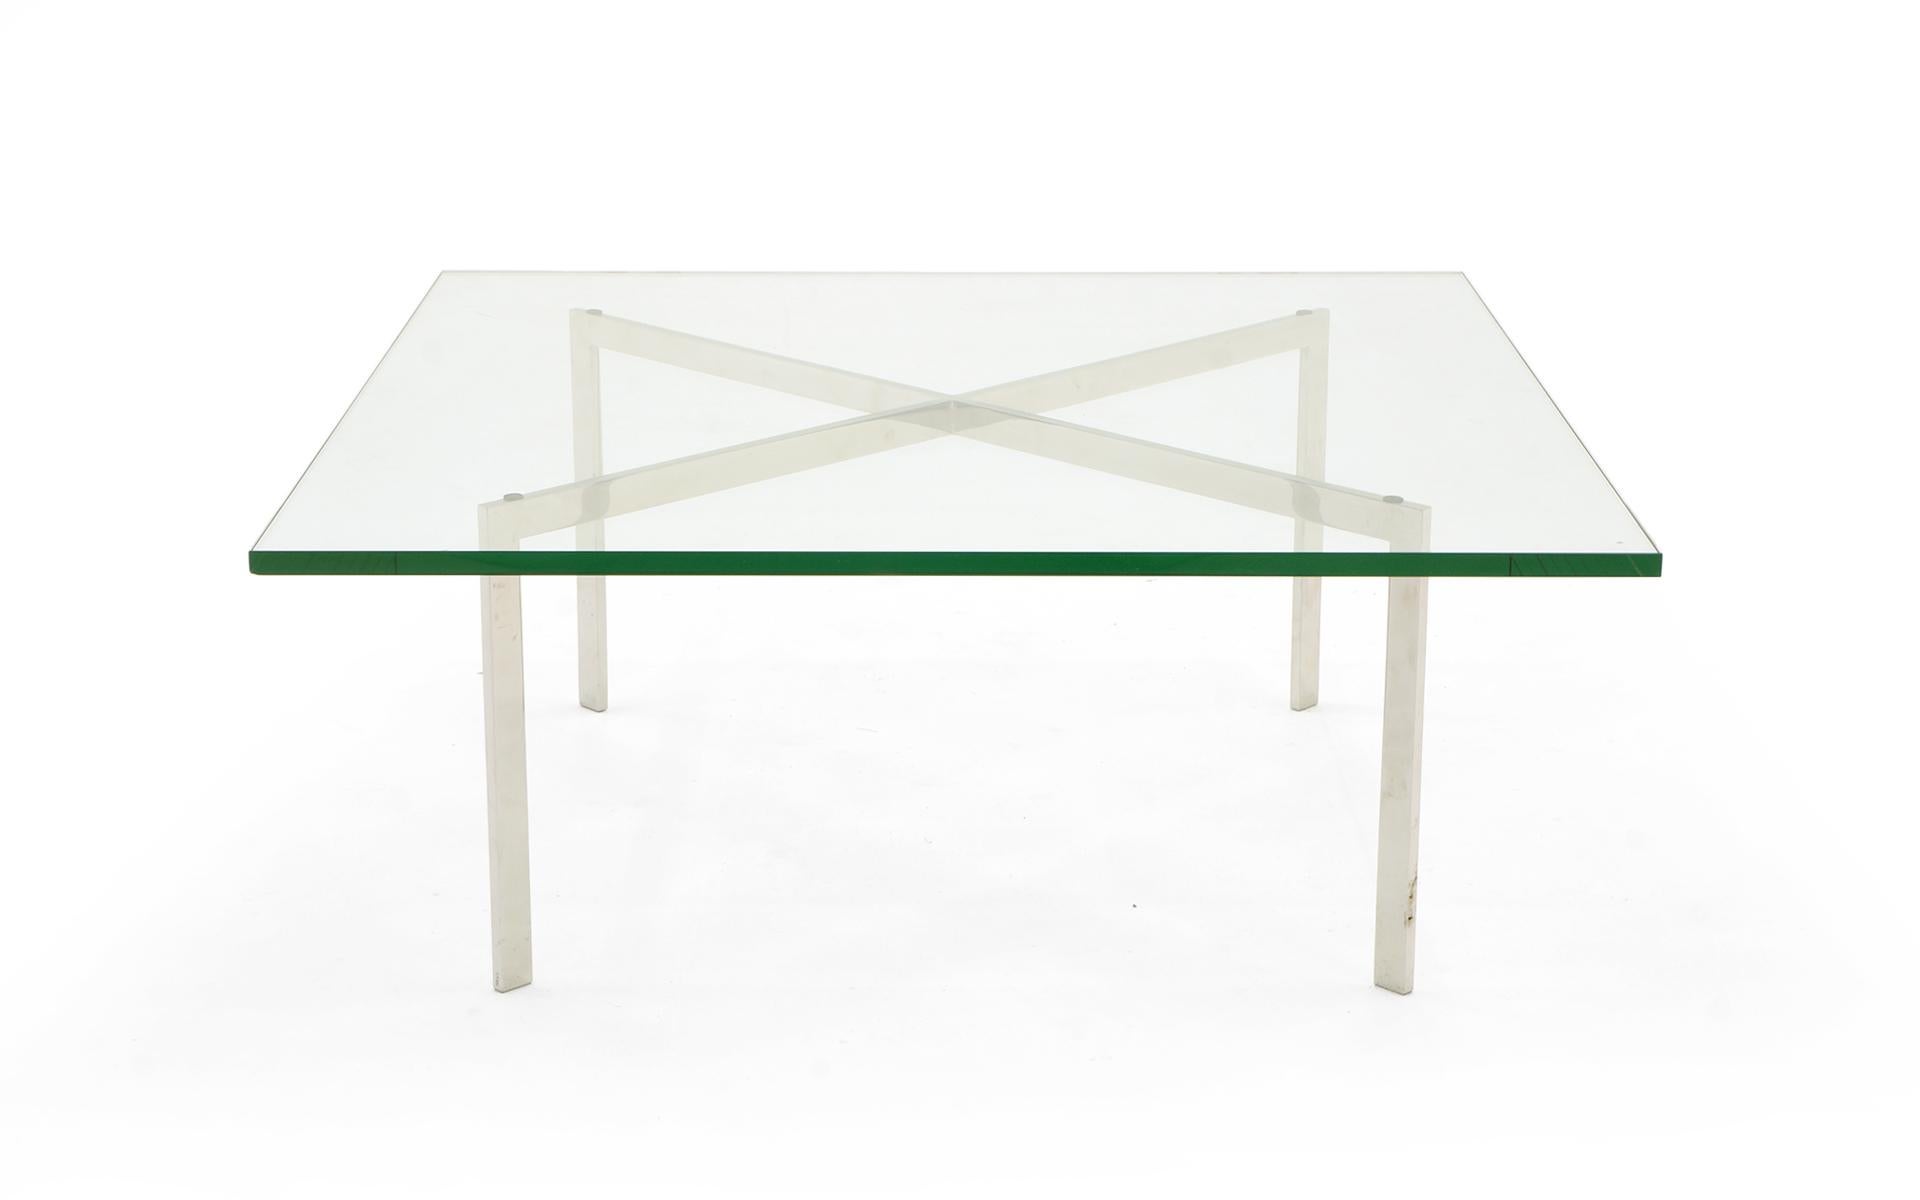 Rare, early and historically significant Barcelona coffee table produced by Gerry Griffith in 1955 for Ludwig Mies van der Rohe in Chicago prior to production by Knoll. His versions are identified by sharp corners at the intersection and turns of